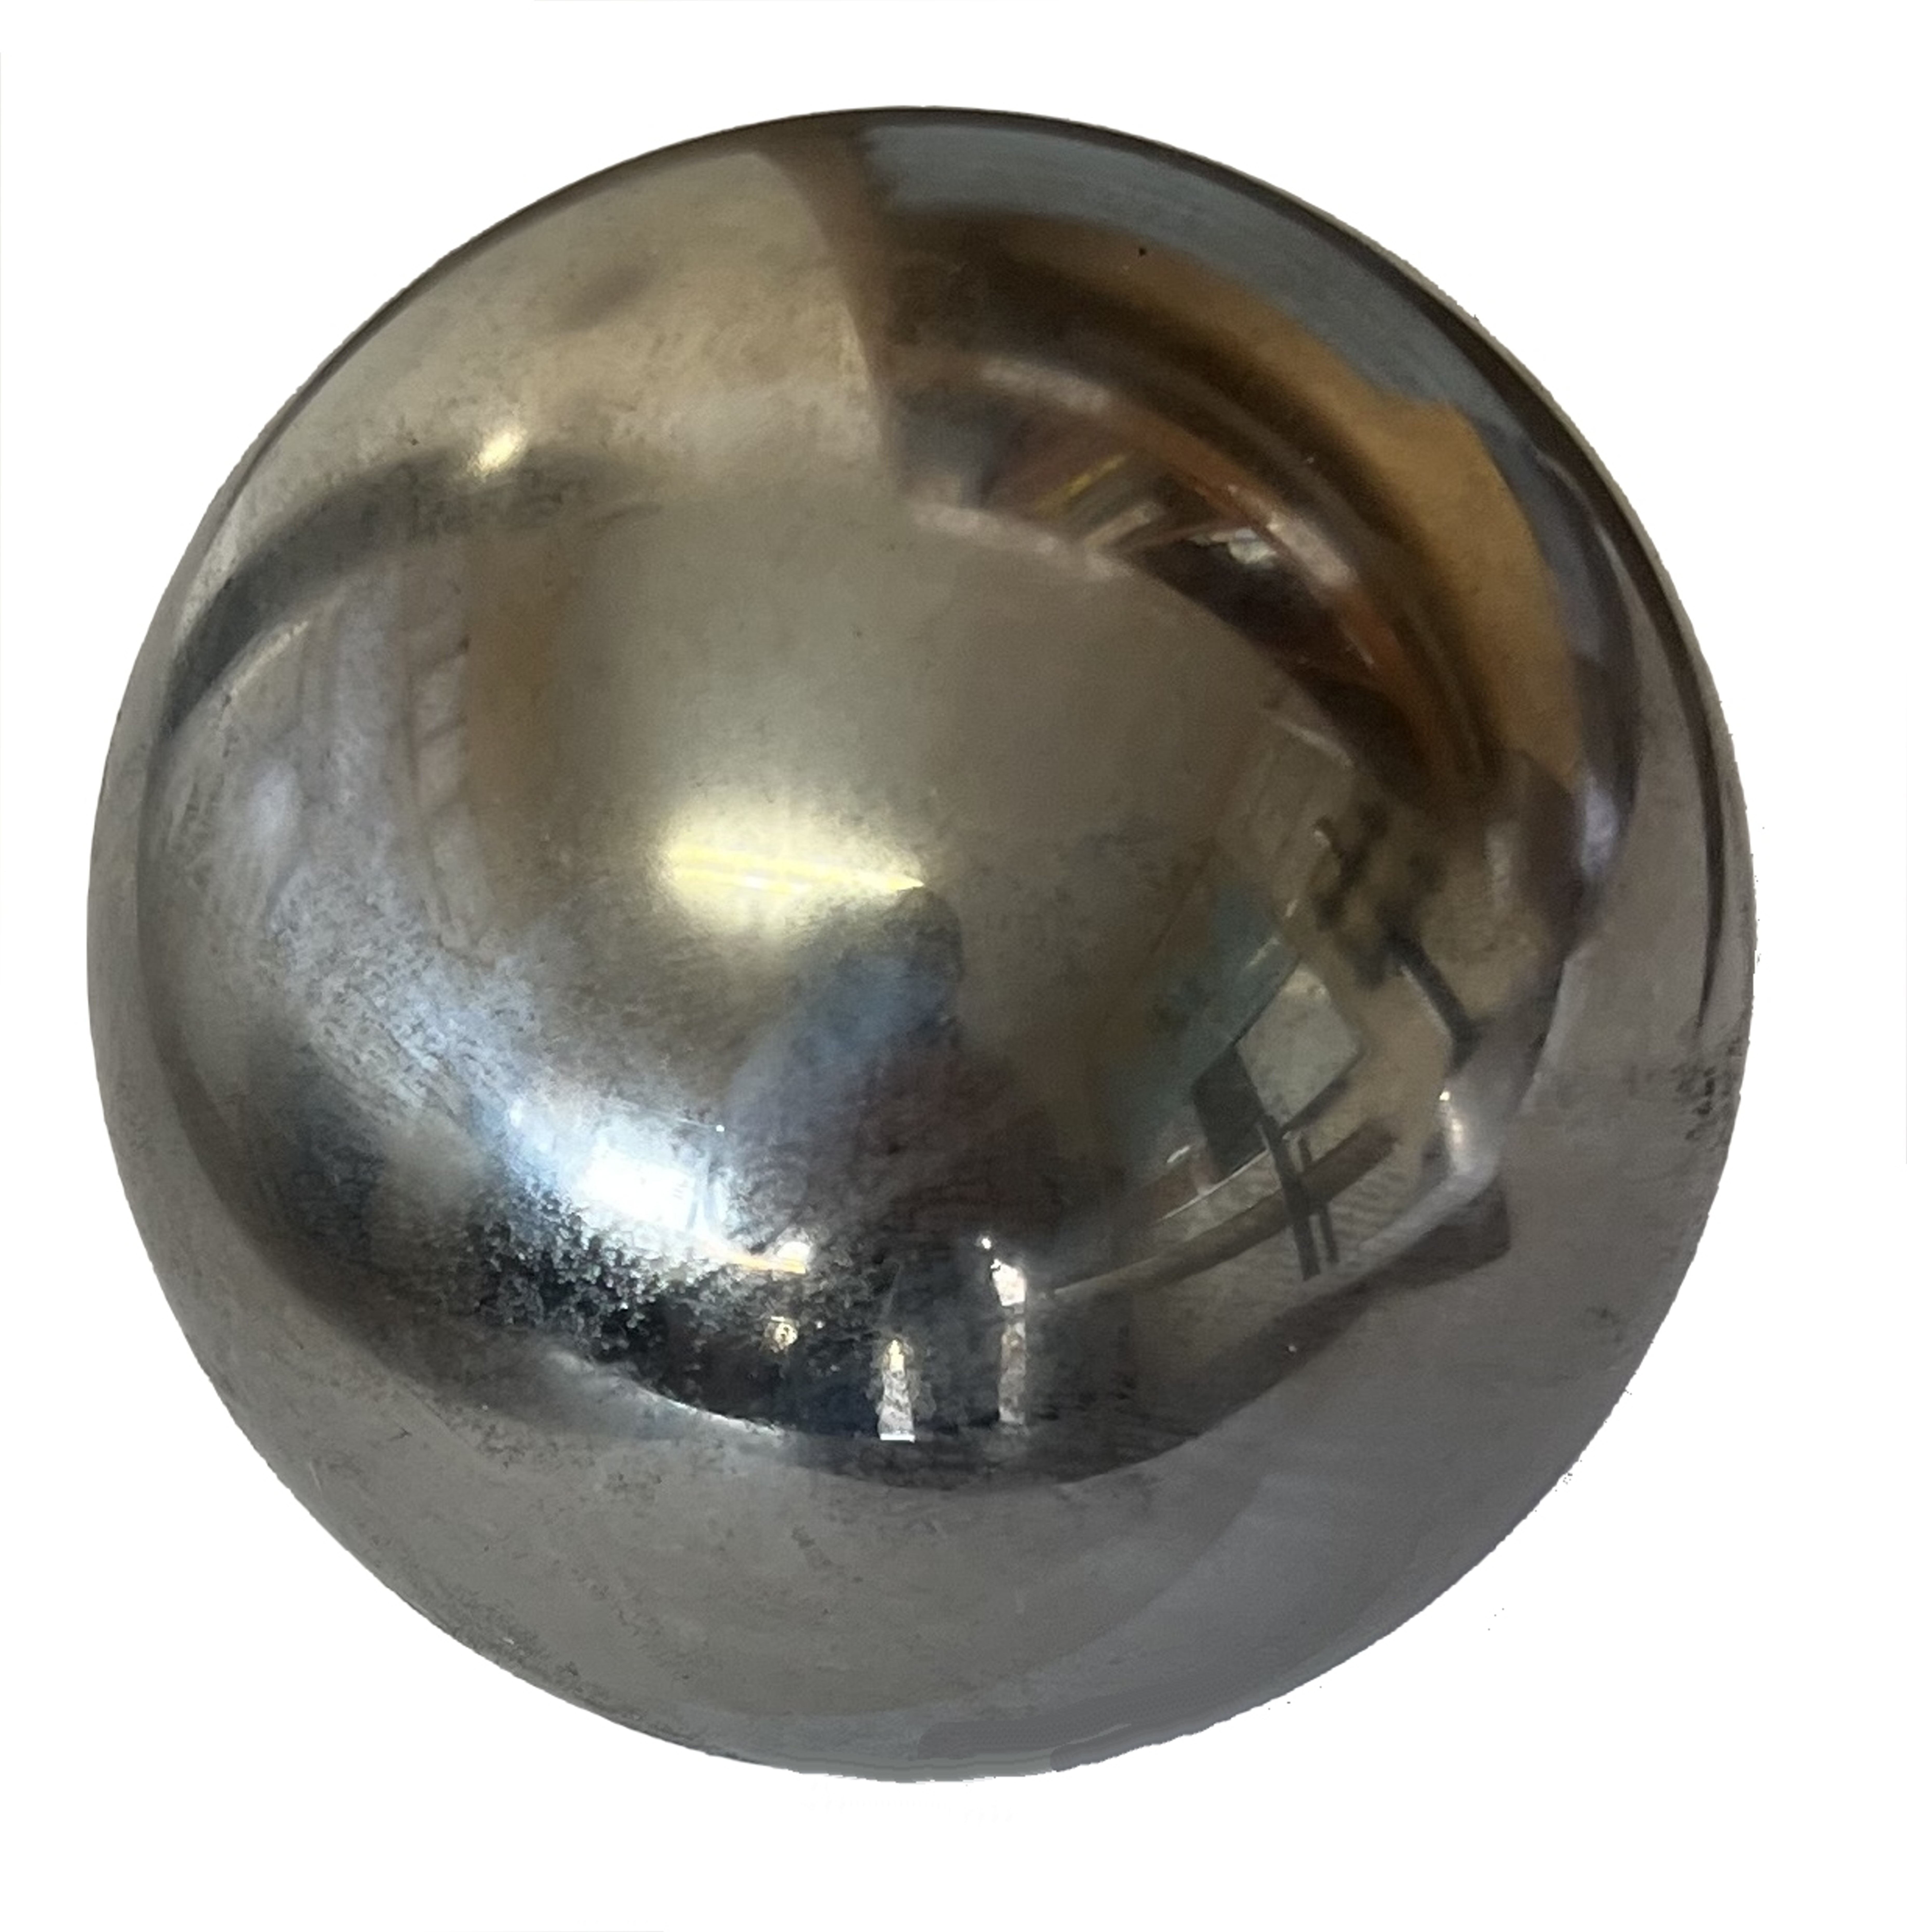 Iron Balls No Quenching Steel Ball Solid φ7丨φ7.5丨φ8丨φ8.5丨φ9丨φ9.5丨φ10丨φ11丨-丨φ70 